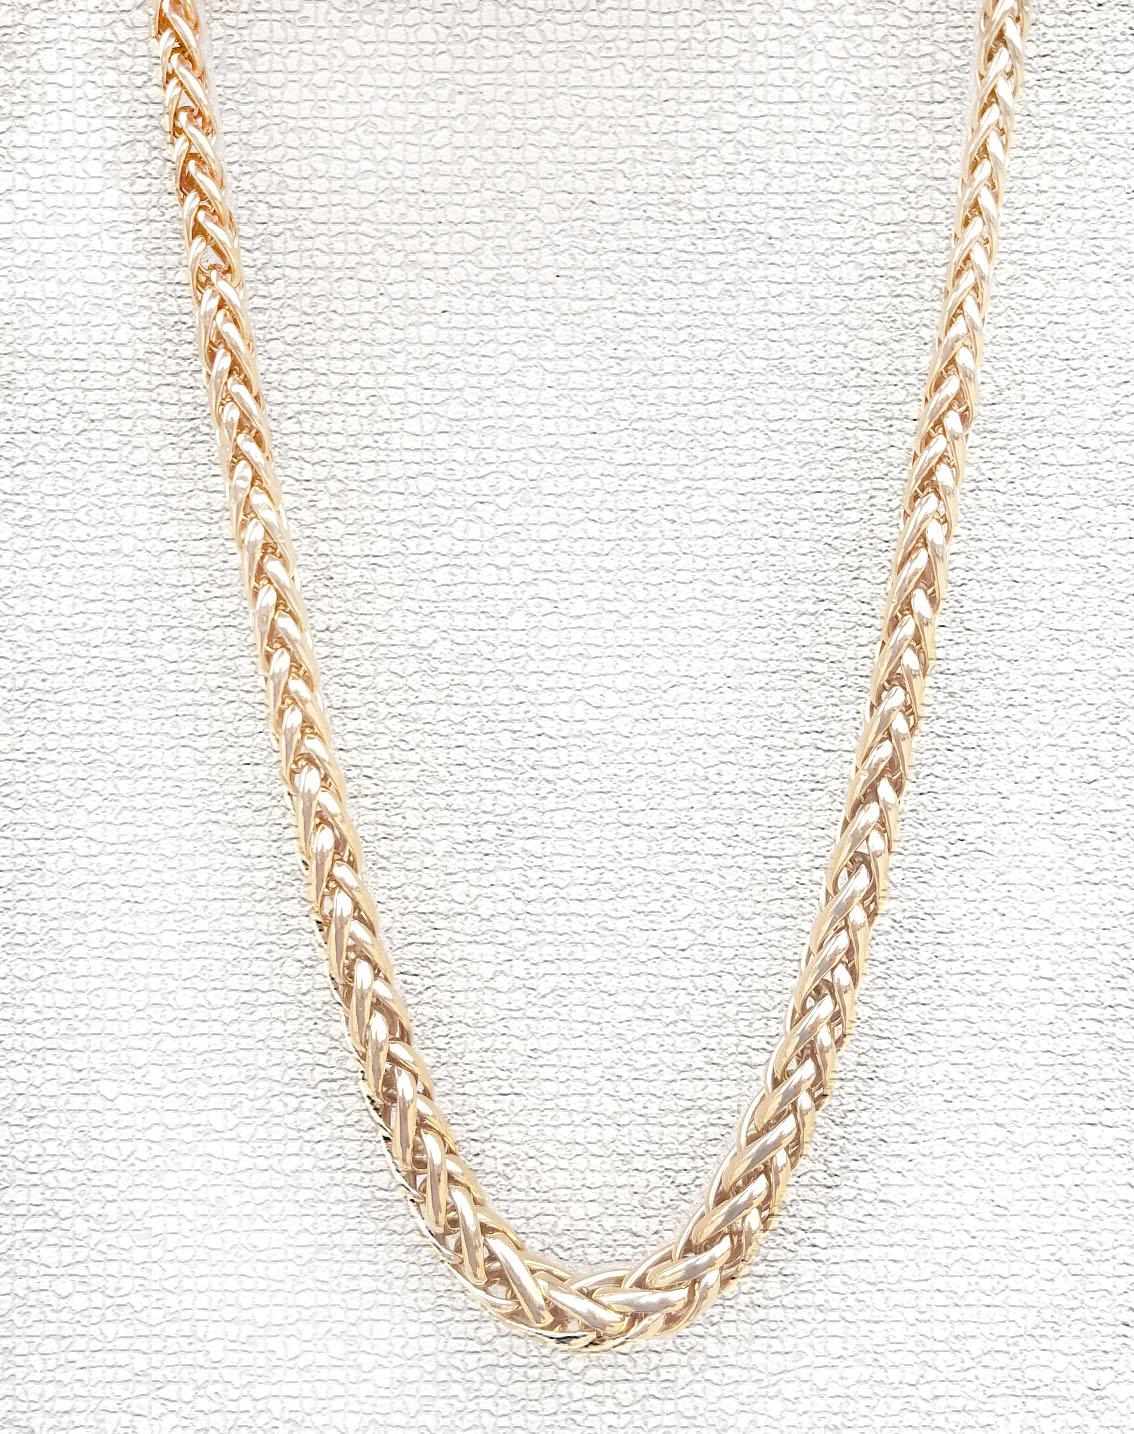 Ladies 14k Yellow Gold Tapered Hollow Braided Necklace in a high polish finish.  This 18